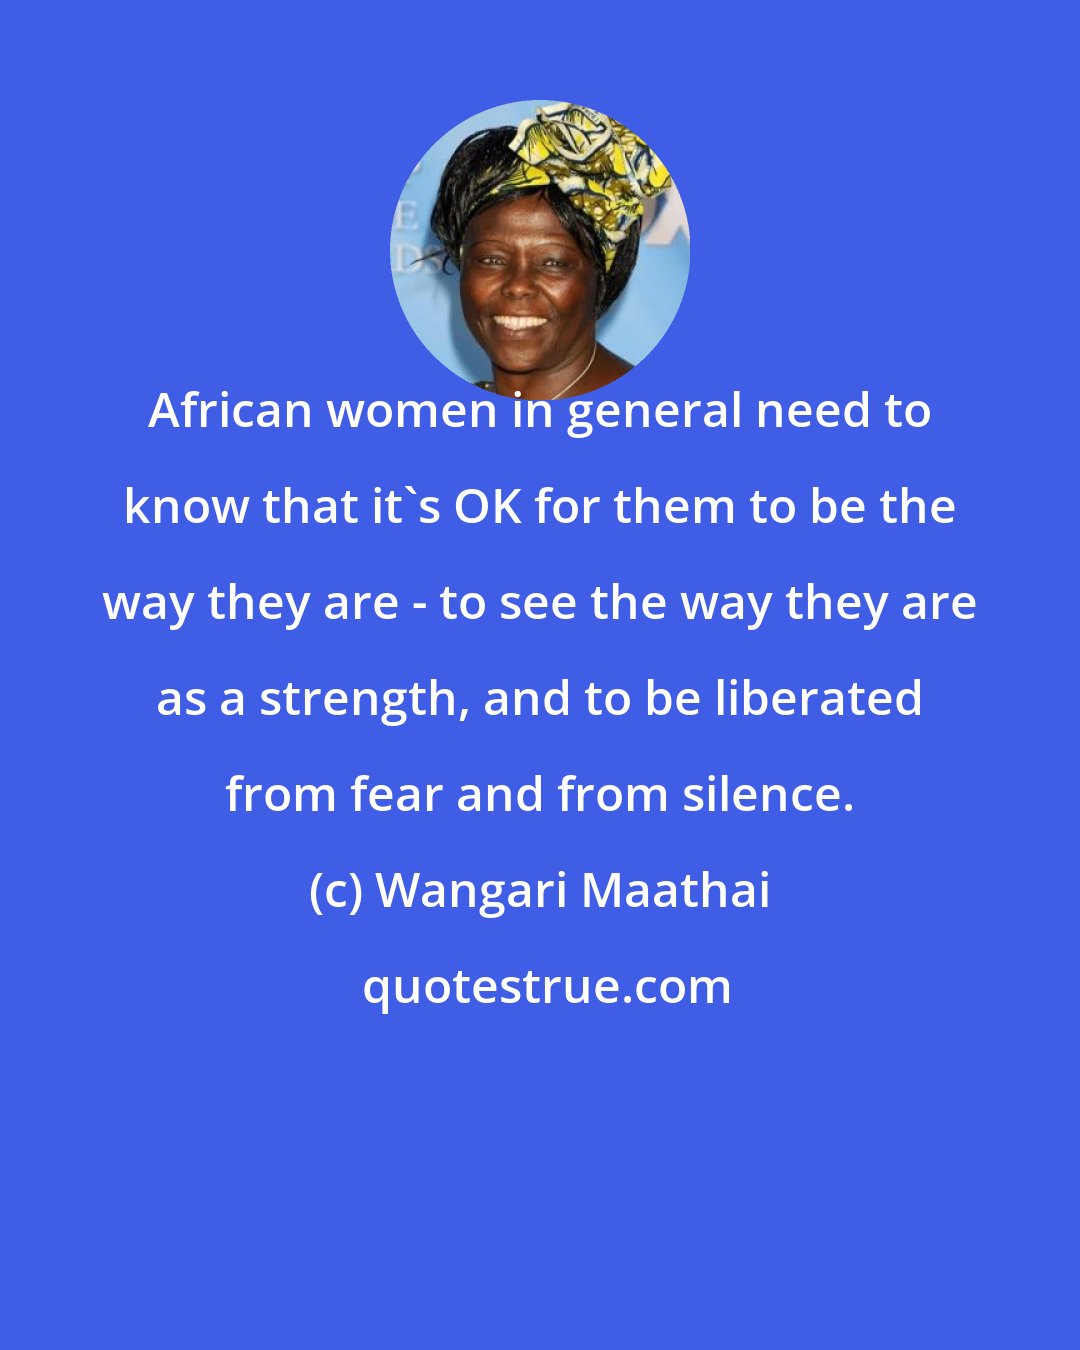 Wangari Maathai: African women in general need to know that it's OK for them to be the way they are - to see the way they are as a strength, and to be liberated from fear and from silence.